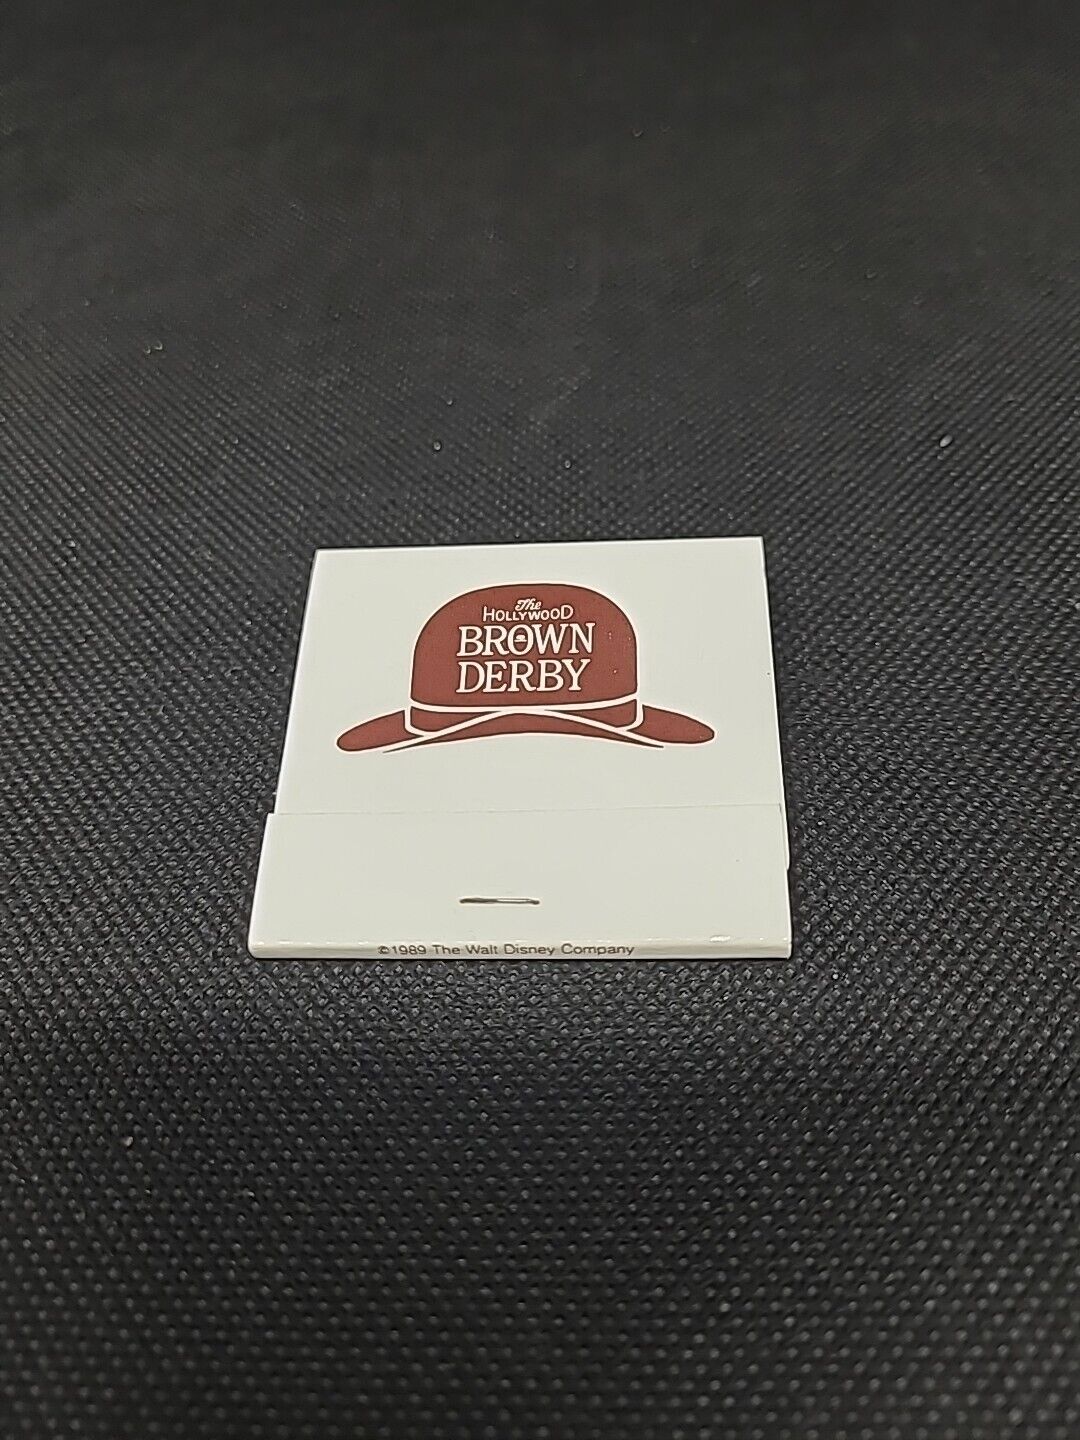 Matchbook: “The Brown Derby” Hollywood, CA